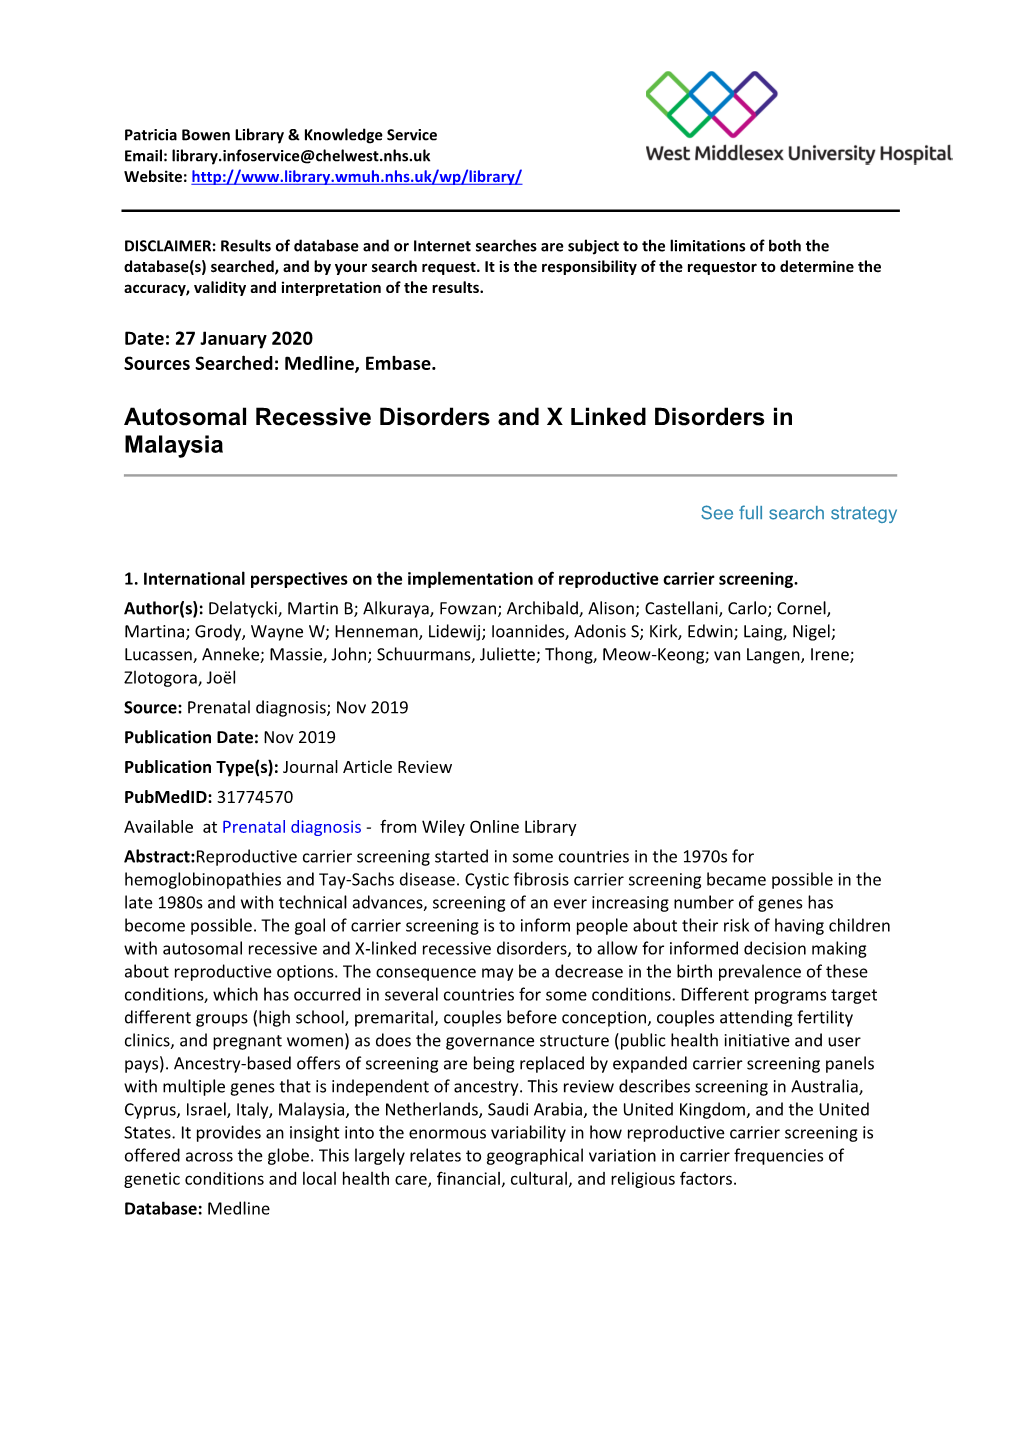 Autosomal Recessive Disorders and X Linked Disorders in Malaysia